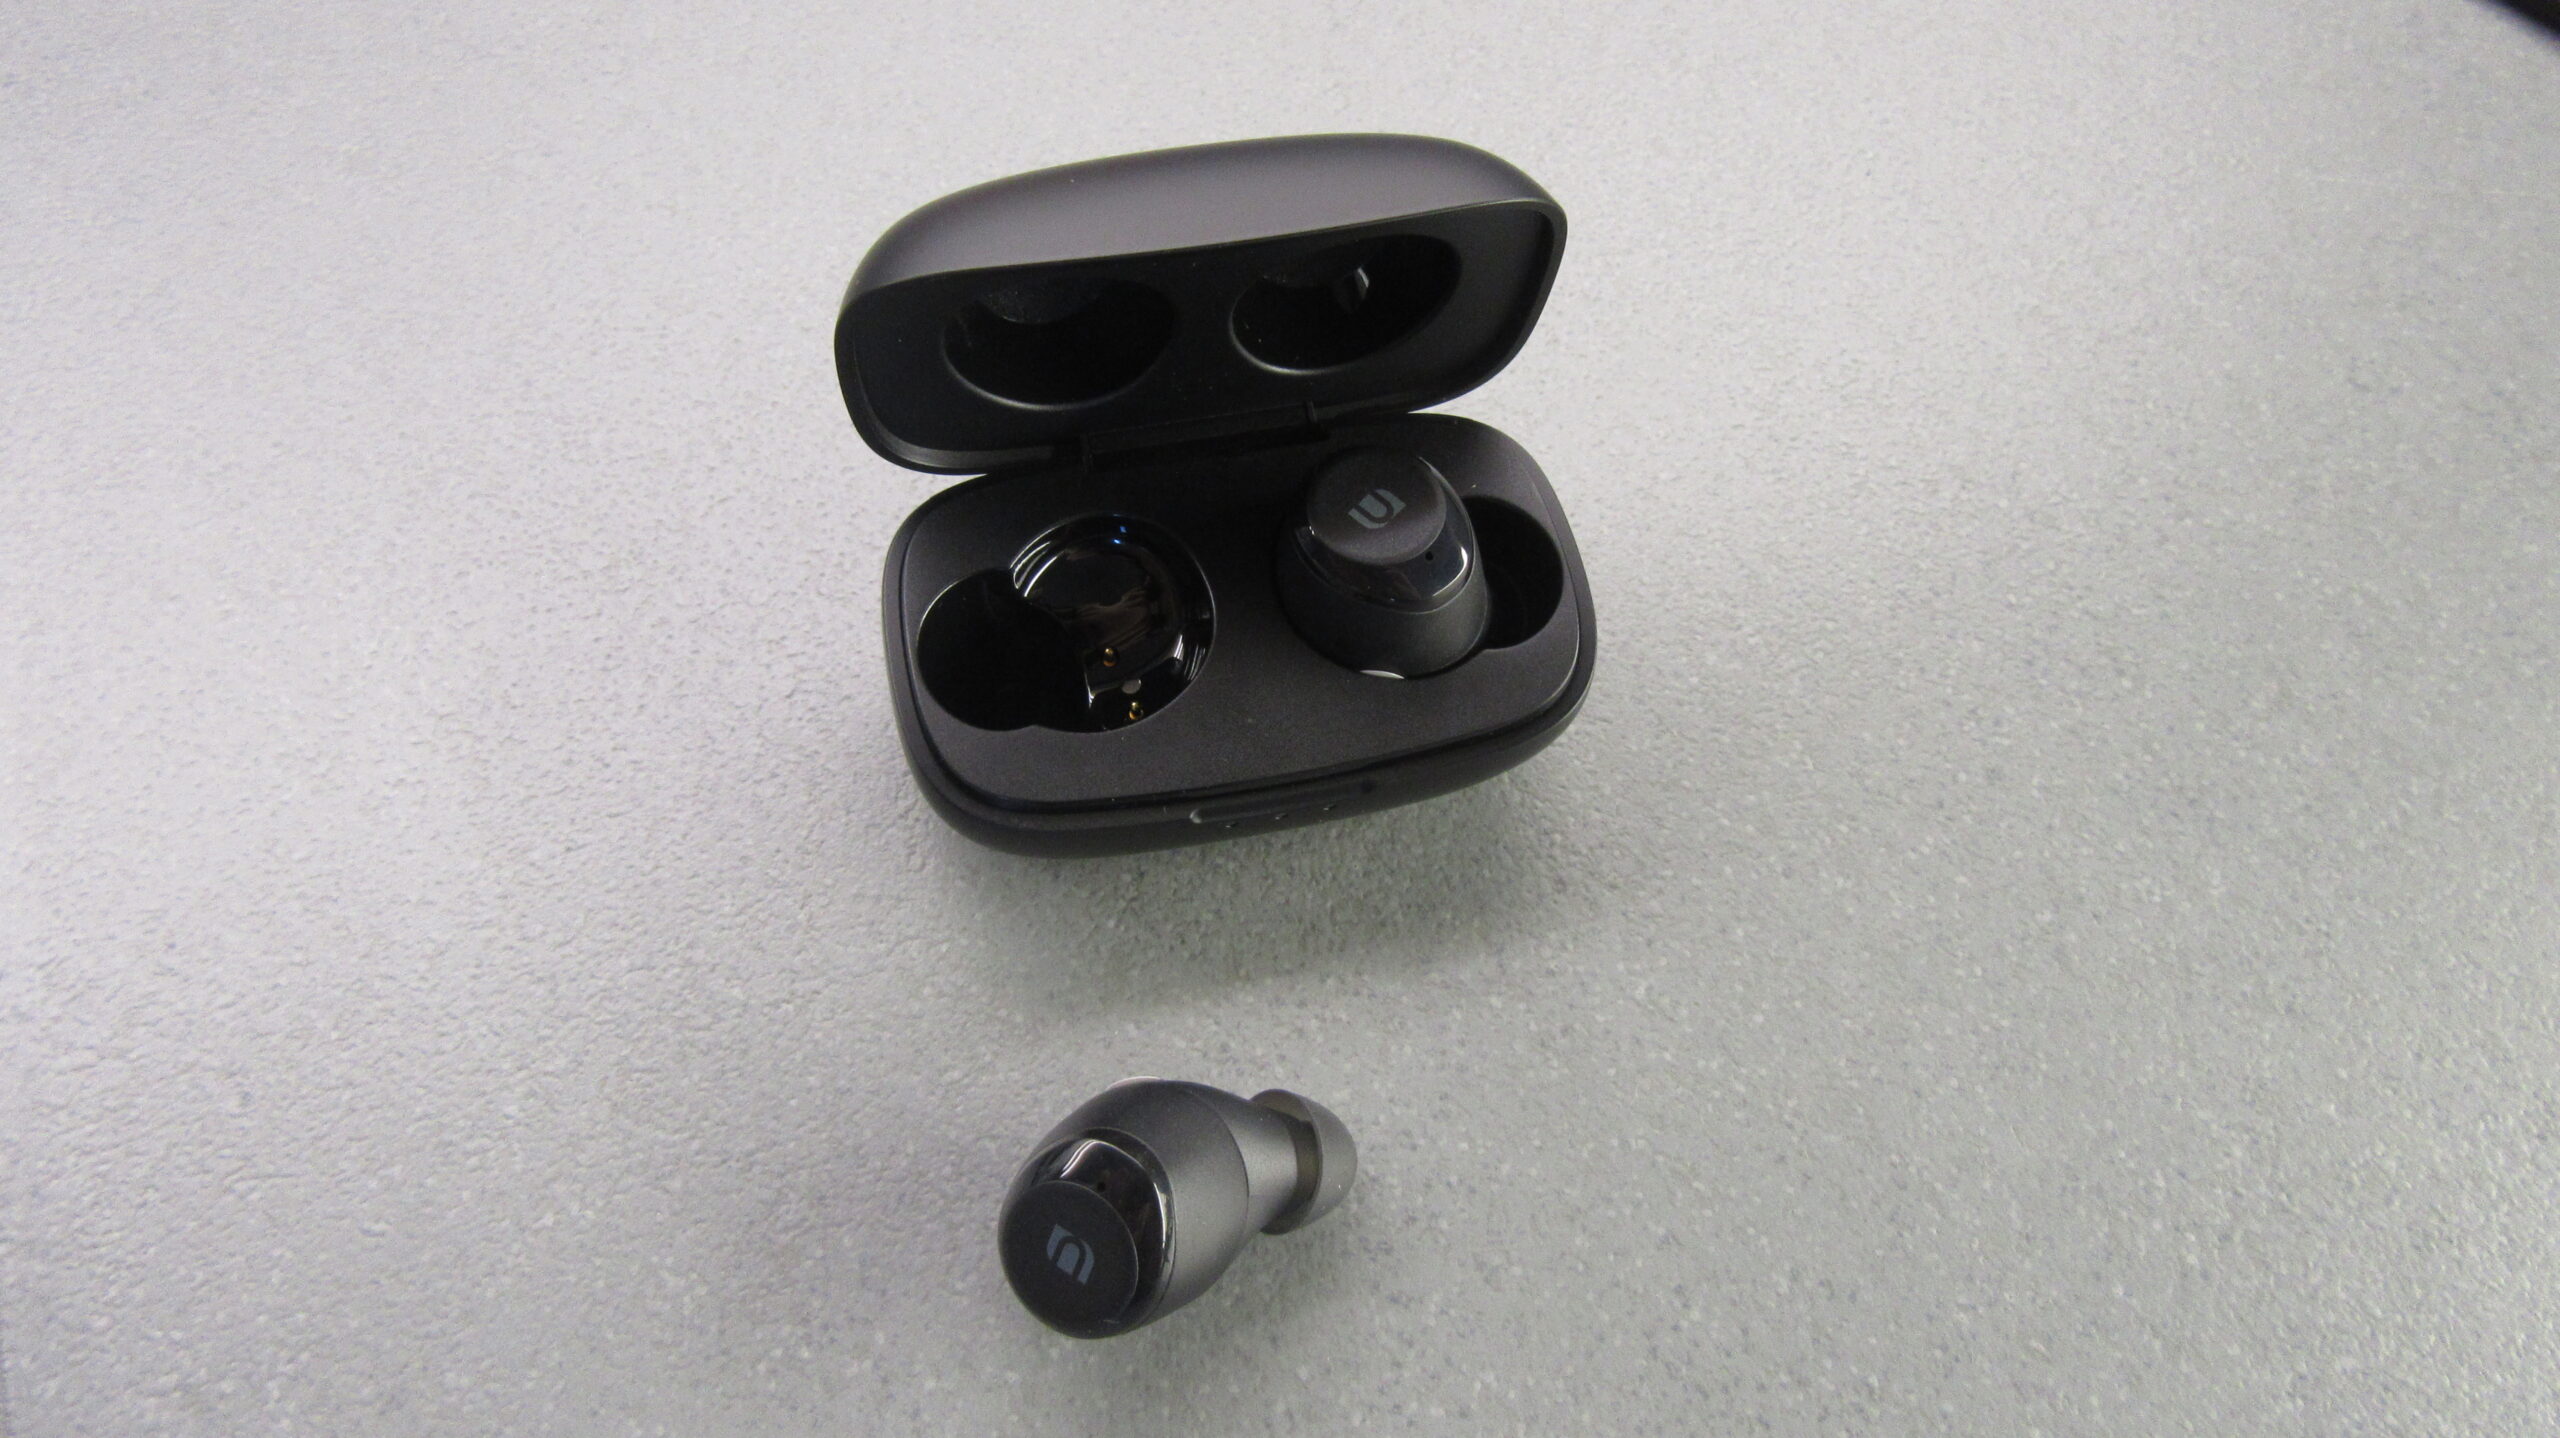 EarPods Earplug Case : 3 Steps (with Pictures) - Instructables